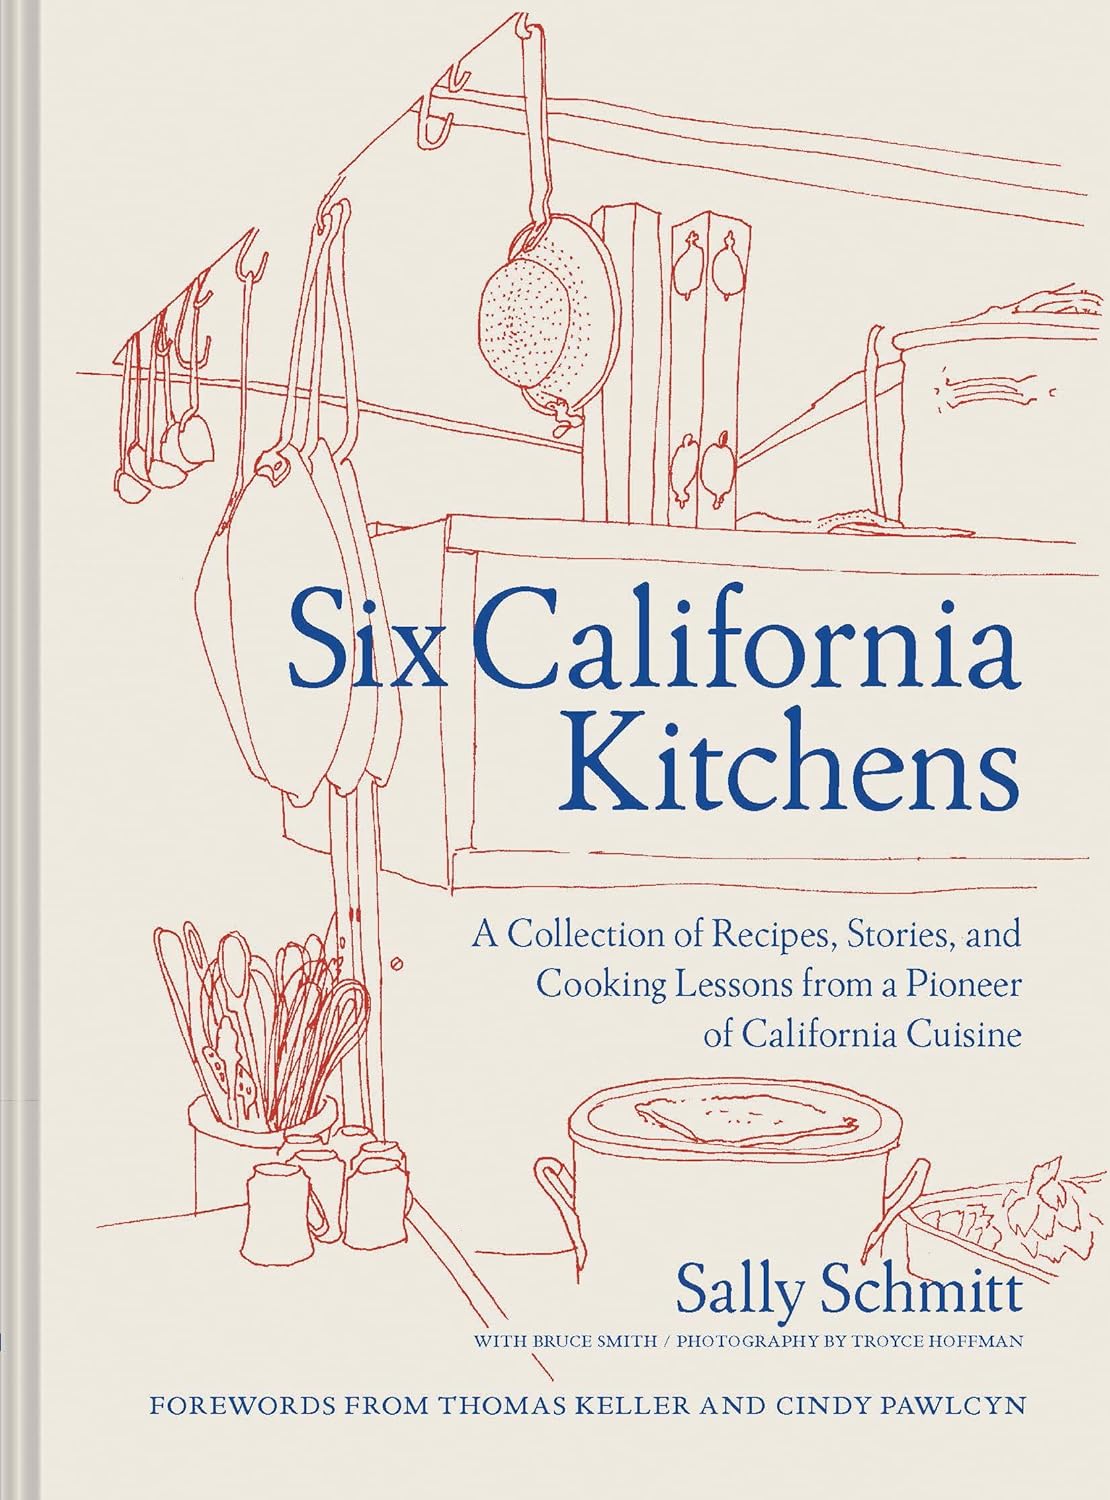 Six California Kitchen is the quintessential California cookbook, with farm-to-table recipes and stories from Sally Schmitt, the pioneering female chef and original founder of the French Laundry.